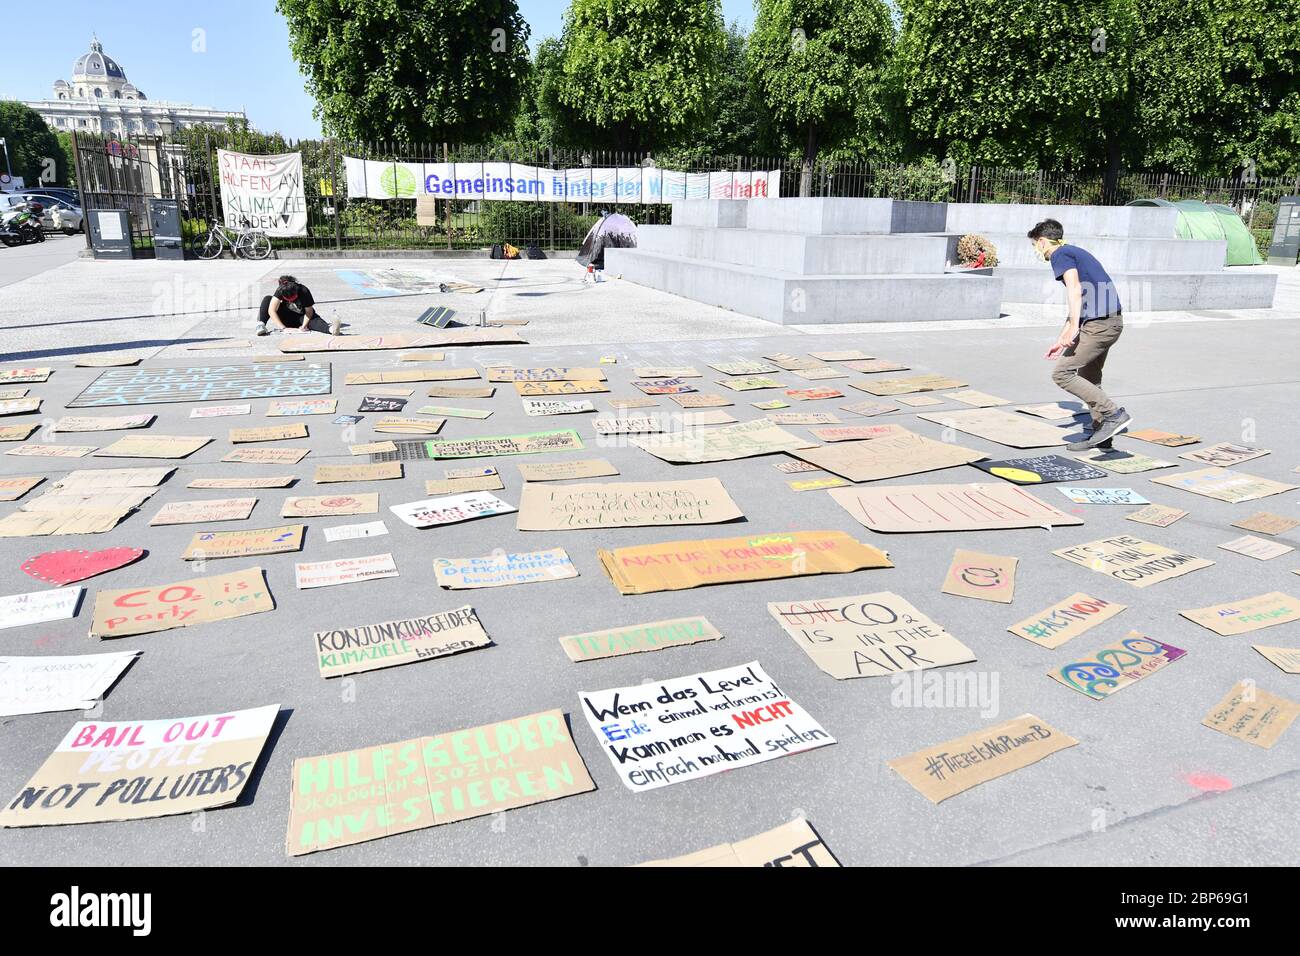 Vienna, Austria. May 18, 2020. Since Wednesday May 6, 2020, activists from Fridays For Future have been on strike at the ' FutureCamp' in front of the Federal Chancellery. The activists are demanding a 'climate corona deal' from the Austrian government. Credit: Franz Perc / Alamy Live News Stock Photo